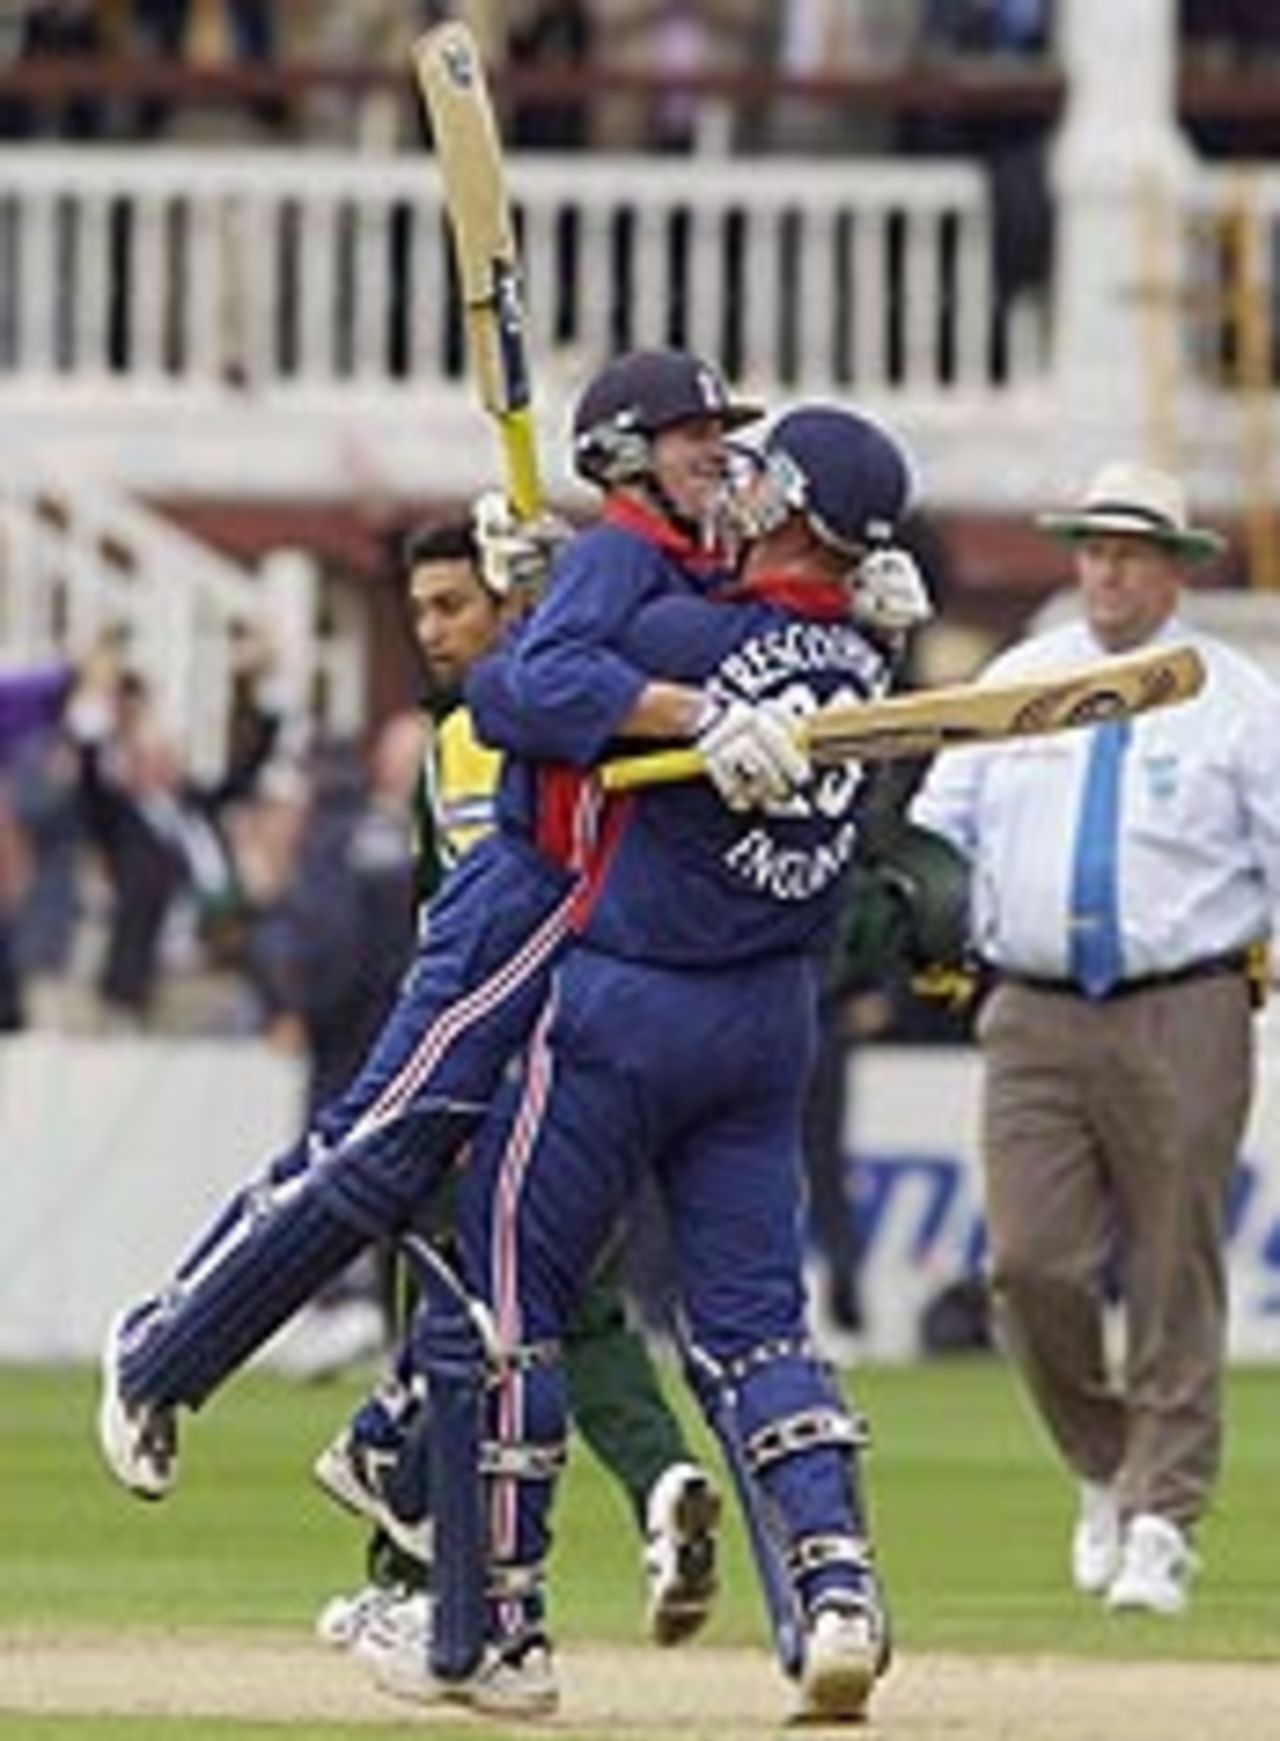 Marcus Trescothick and Chris Read celebrate a thrilling victory in the NatWest Challenge